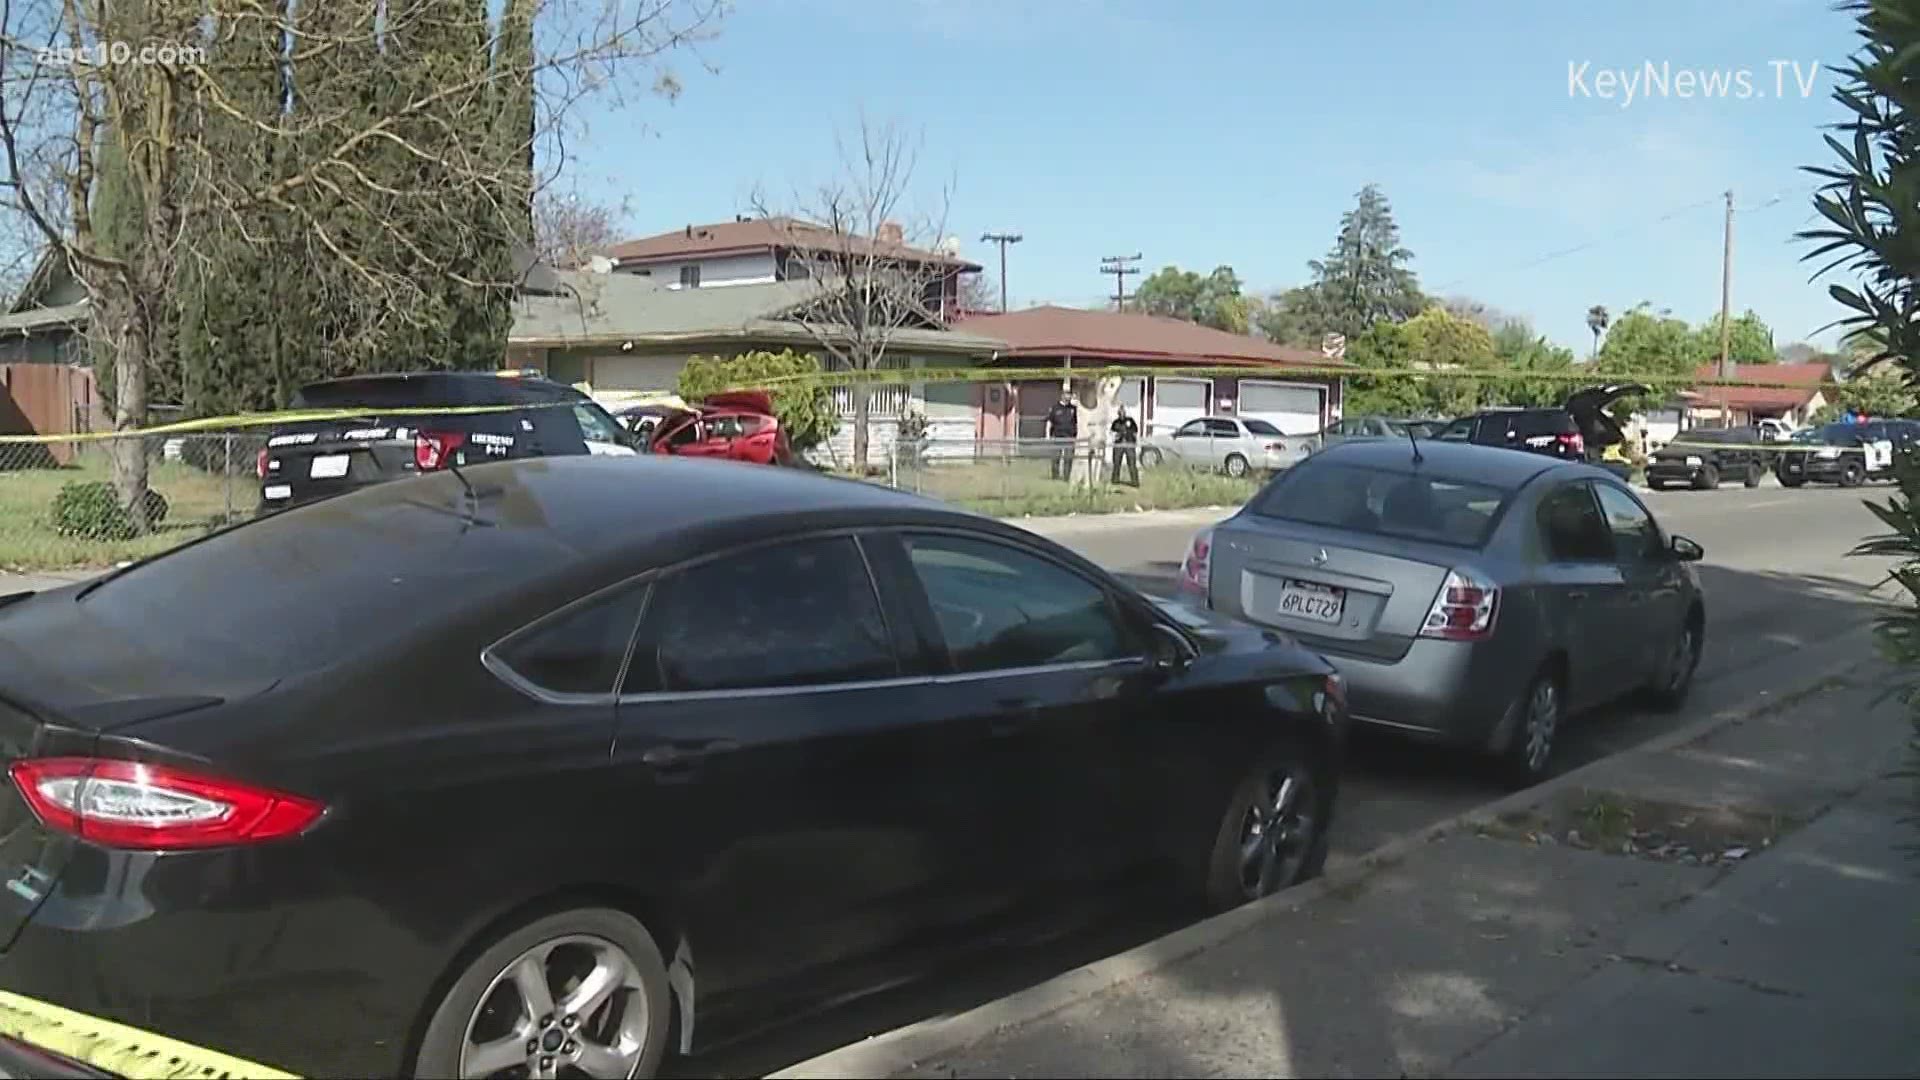 The 14-year-old was shot inside of his car as two other juveniles walked up to him, according to Stockton police.